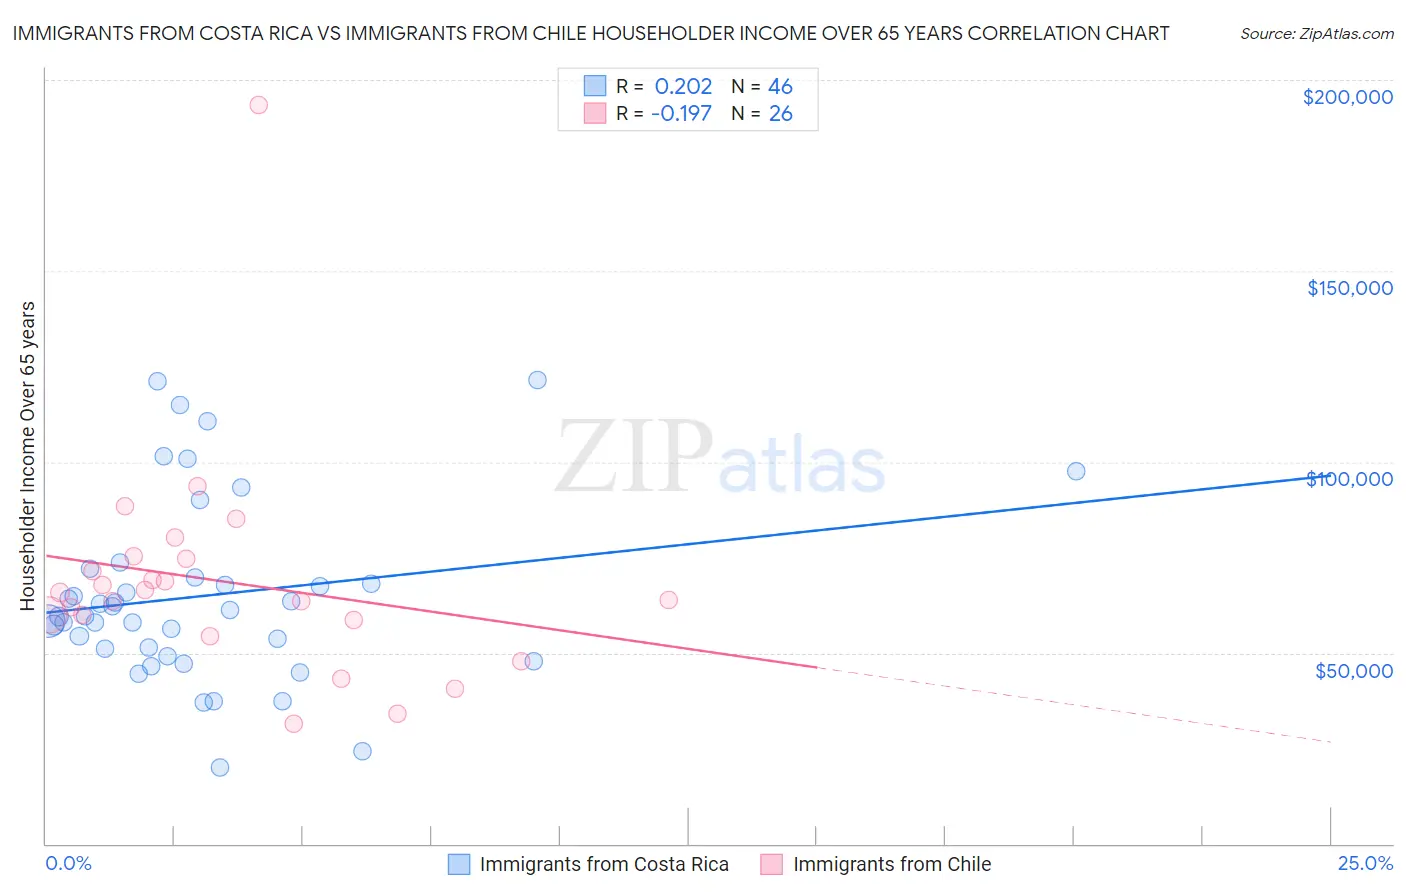 Immigrants from Costa Rica vs Immigrants from Chile Householder Income Over 65 years